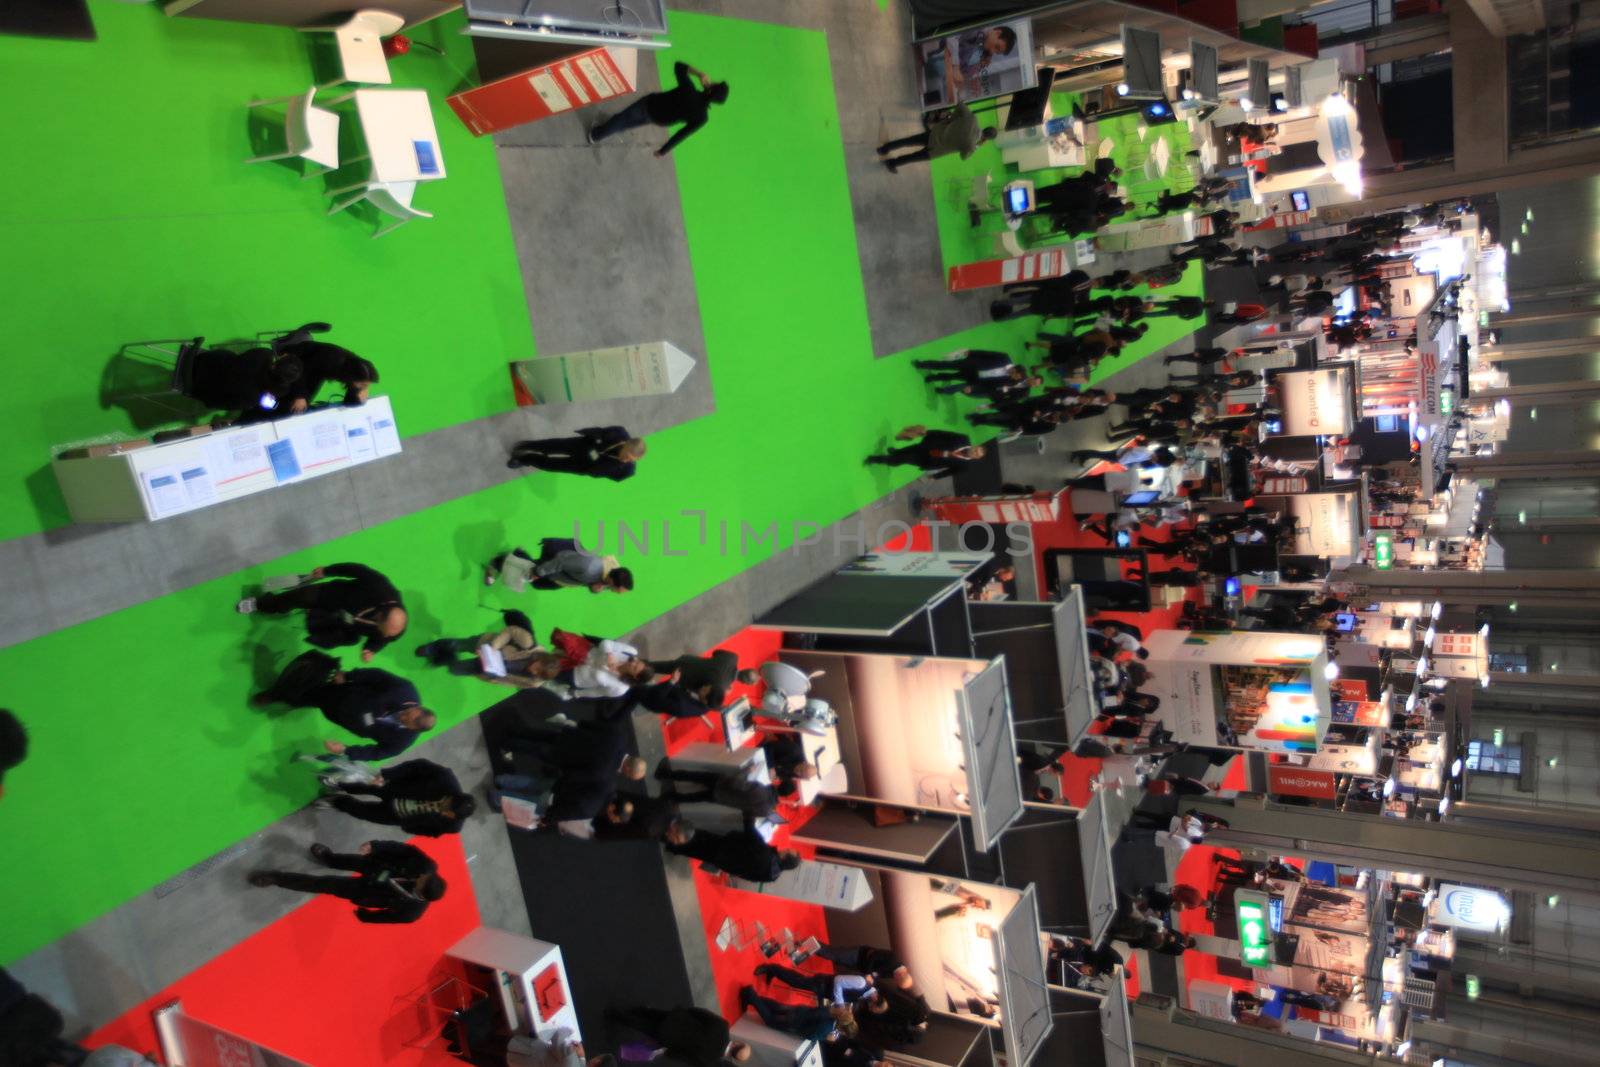 Panoramic view of people visiting technologies stands during SMAU, international fair of business intelligence and information technology in Milan, Italy.